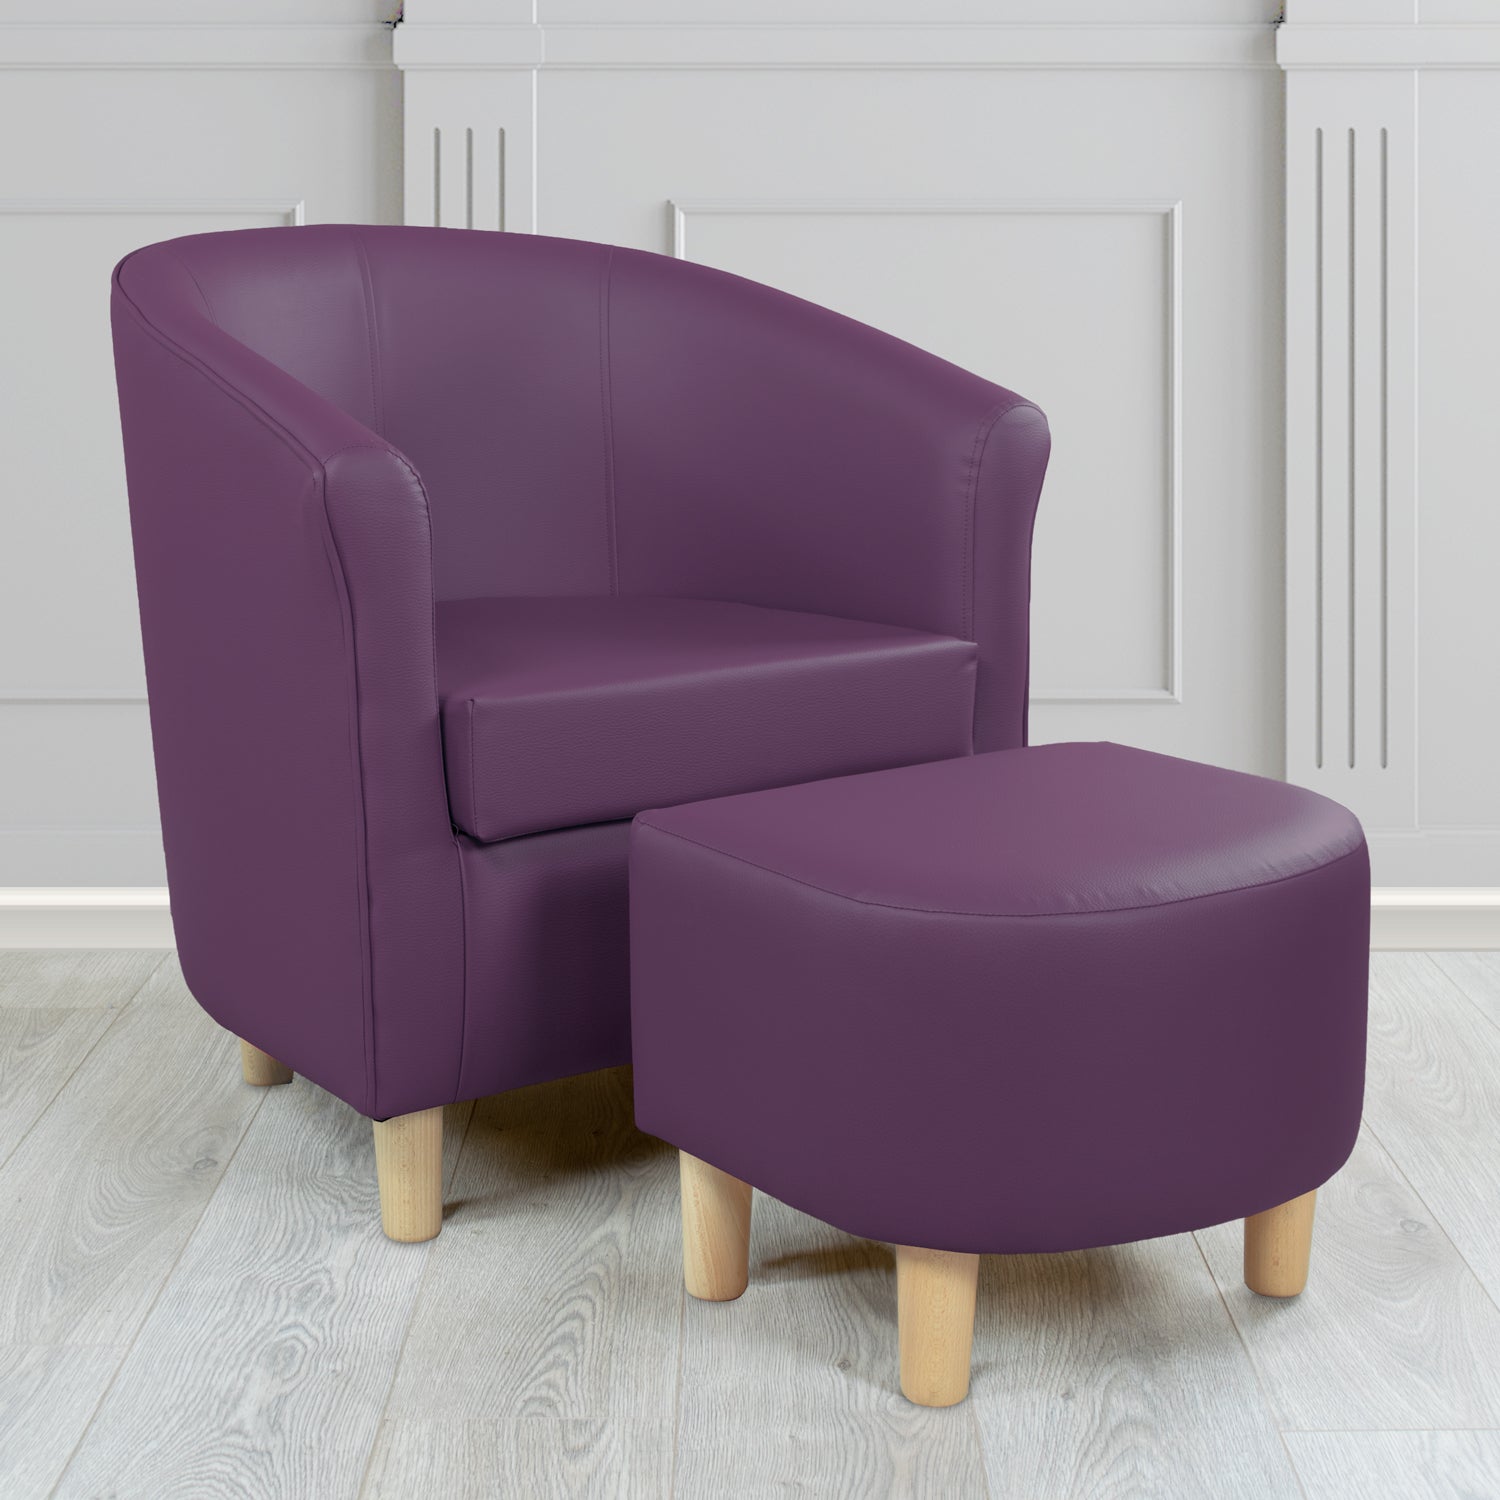 Tuscany Just Colour Damson Faux Leather Tub Chair with Dee Footstool Set - The Tub Chair Shop